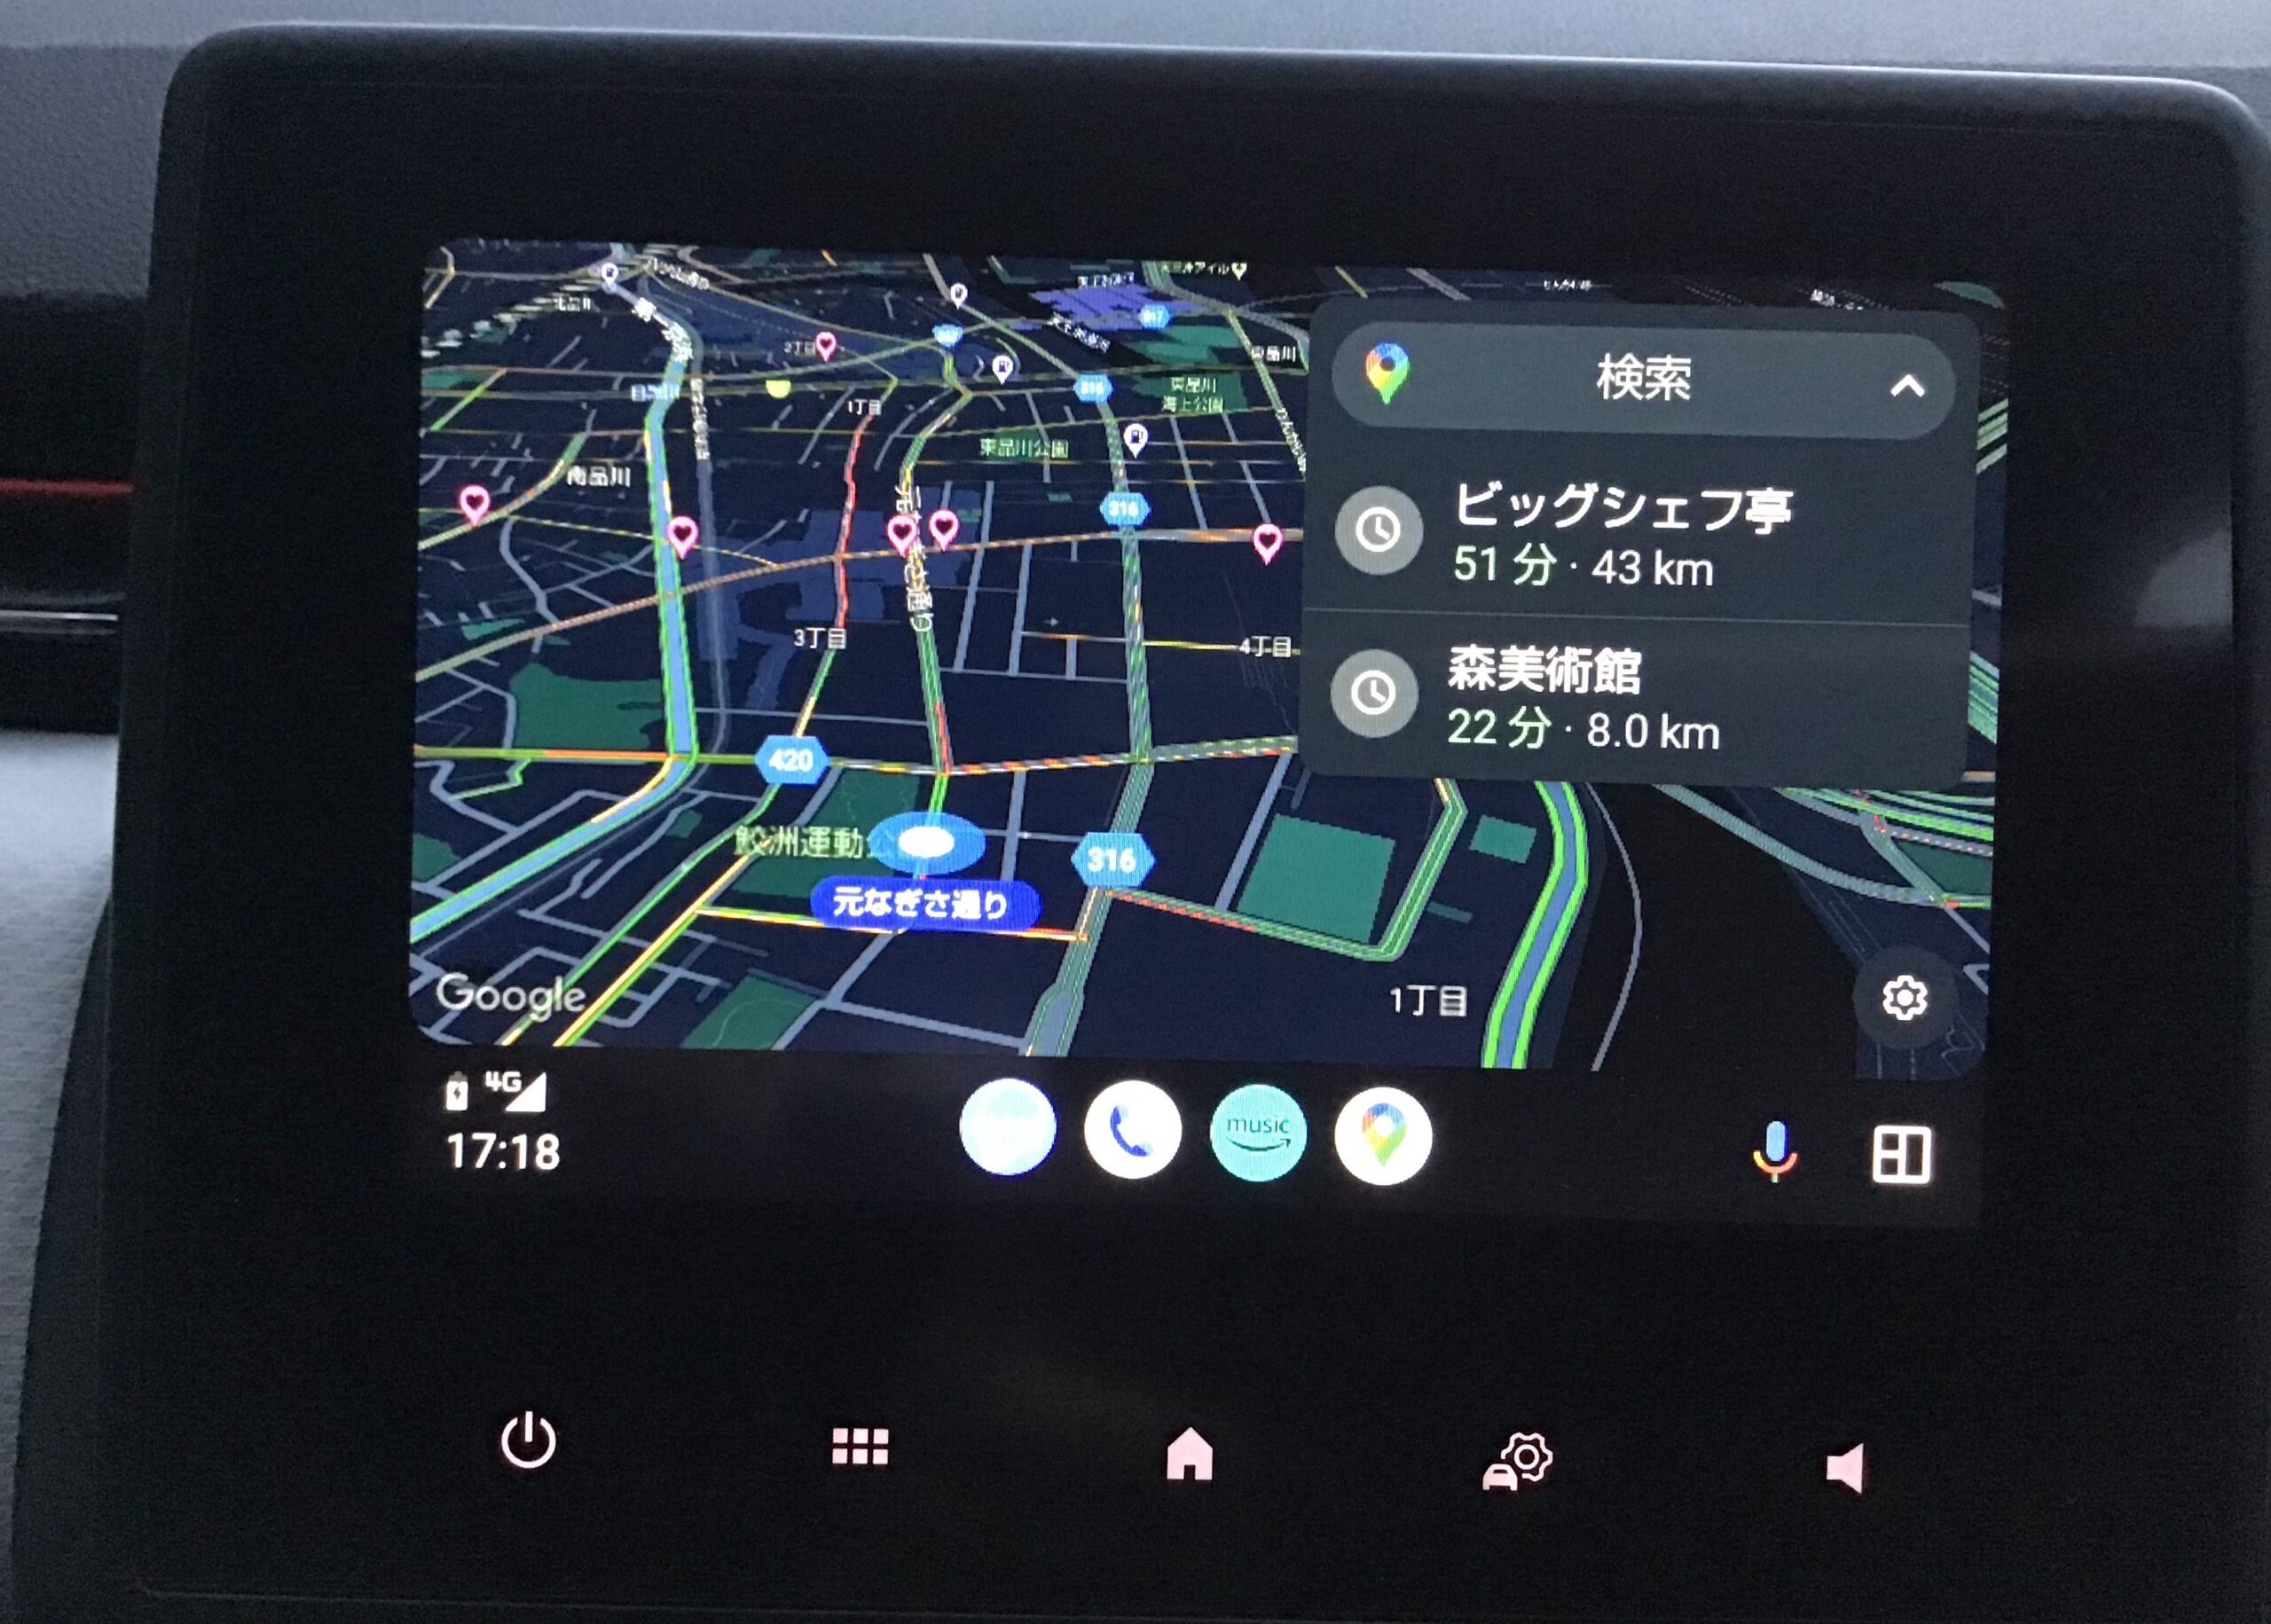 Android Auto　インターフェース　起動